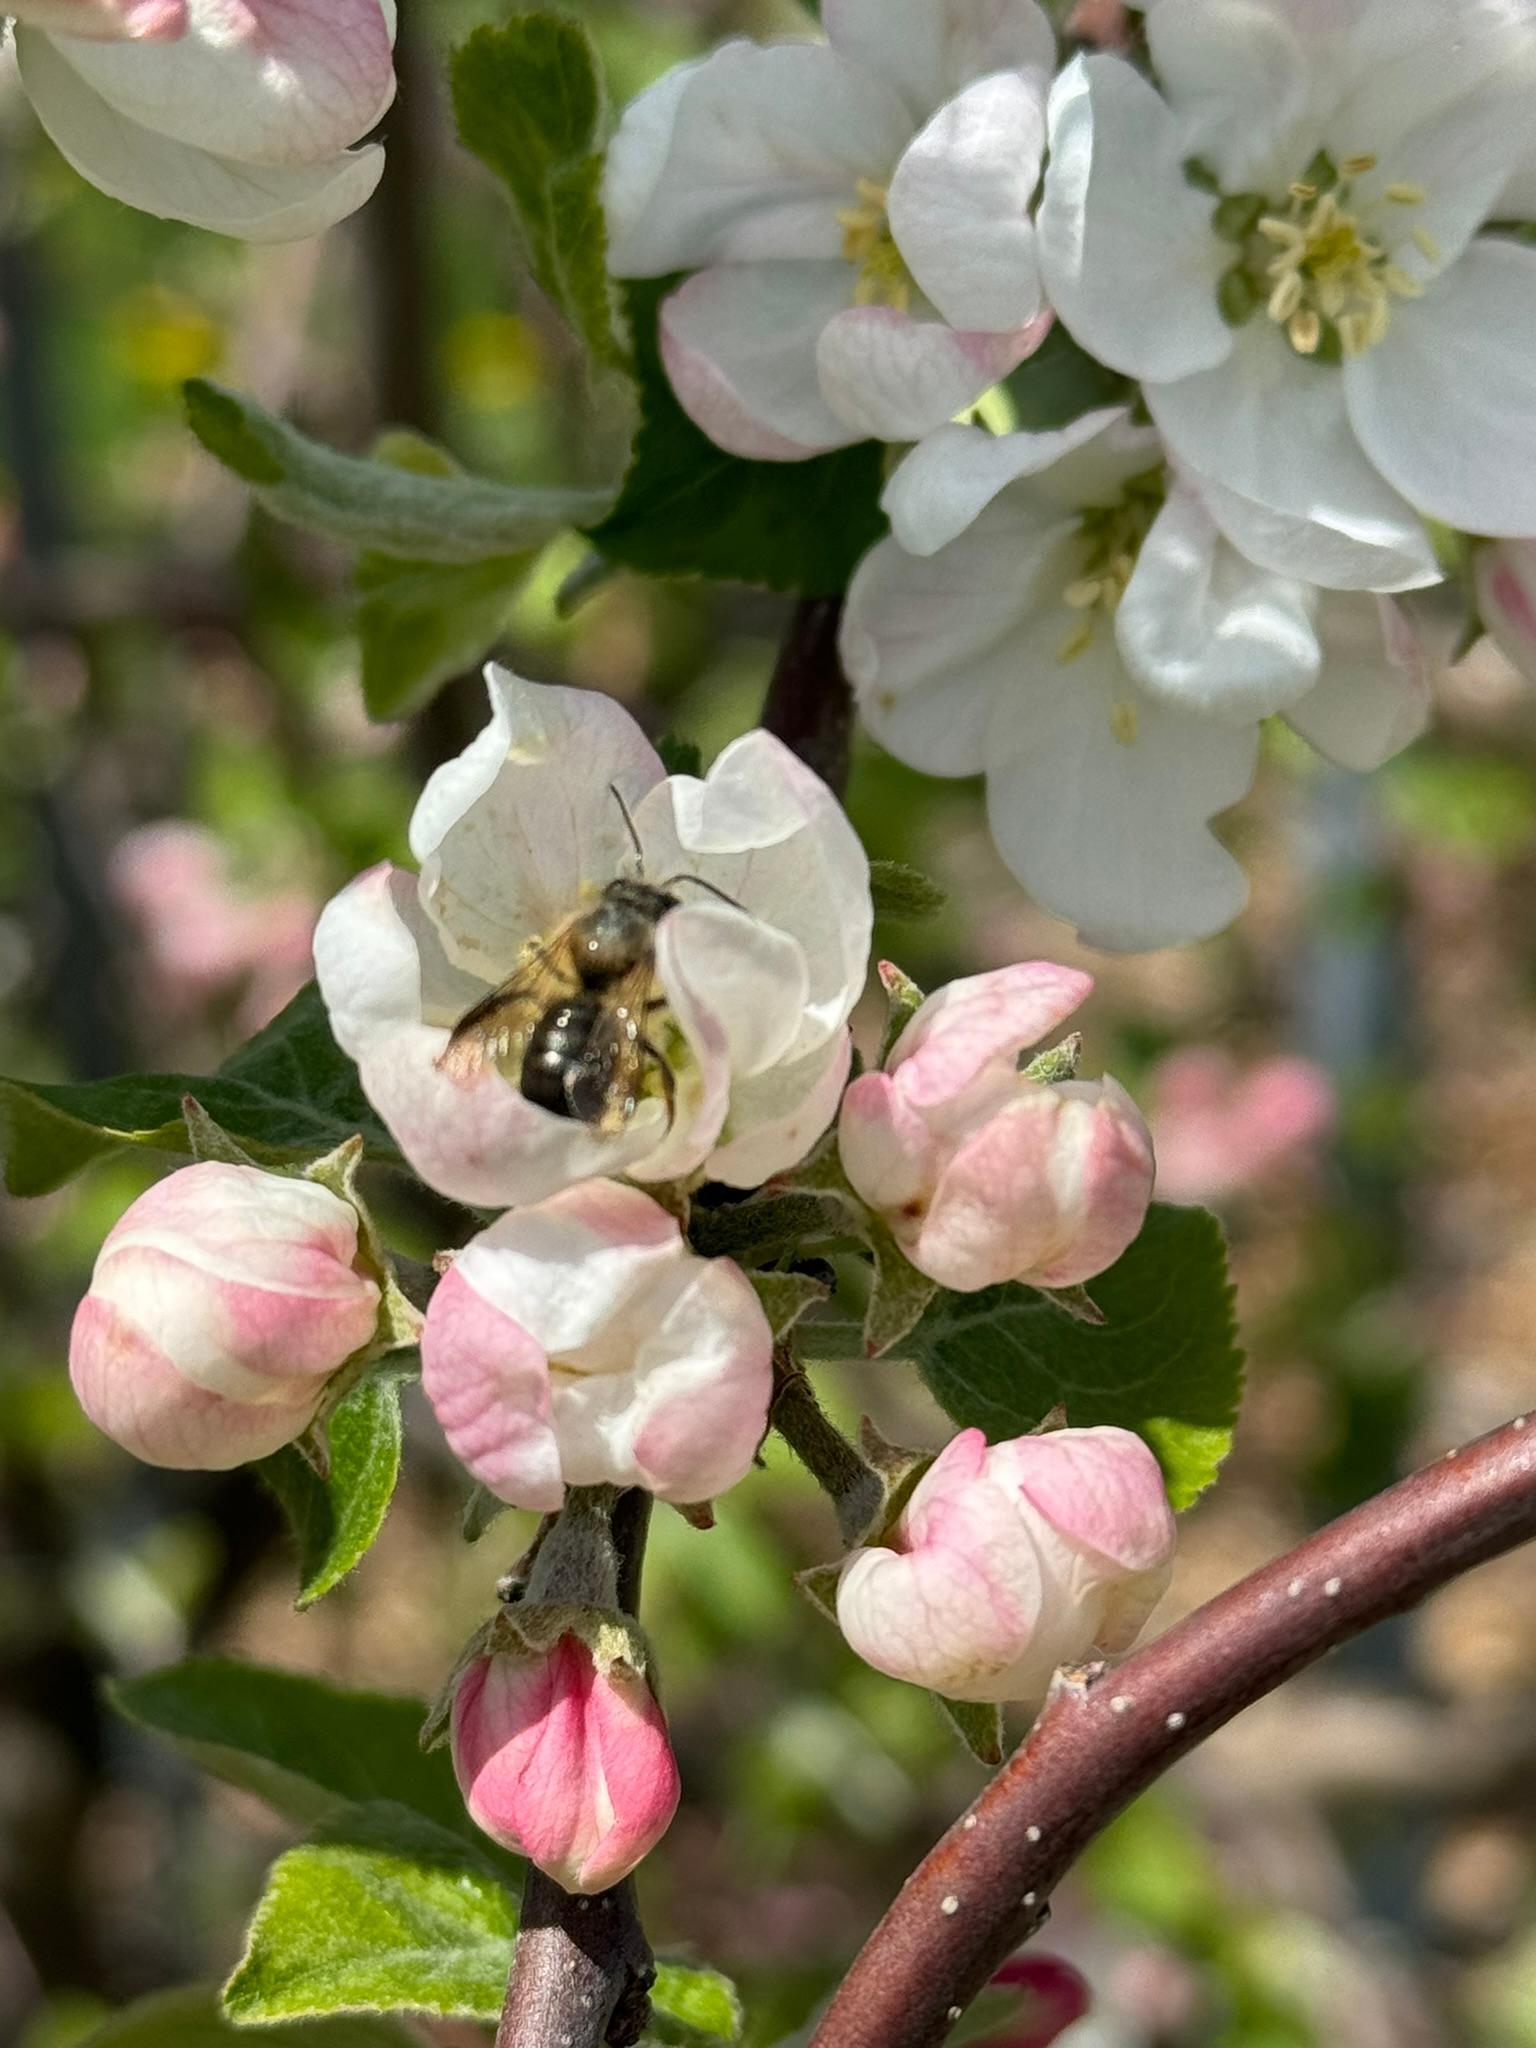 Bumble bee on apple blossom.